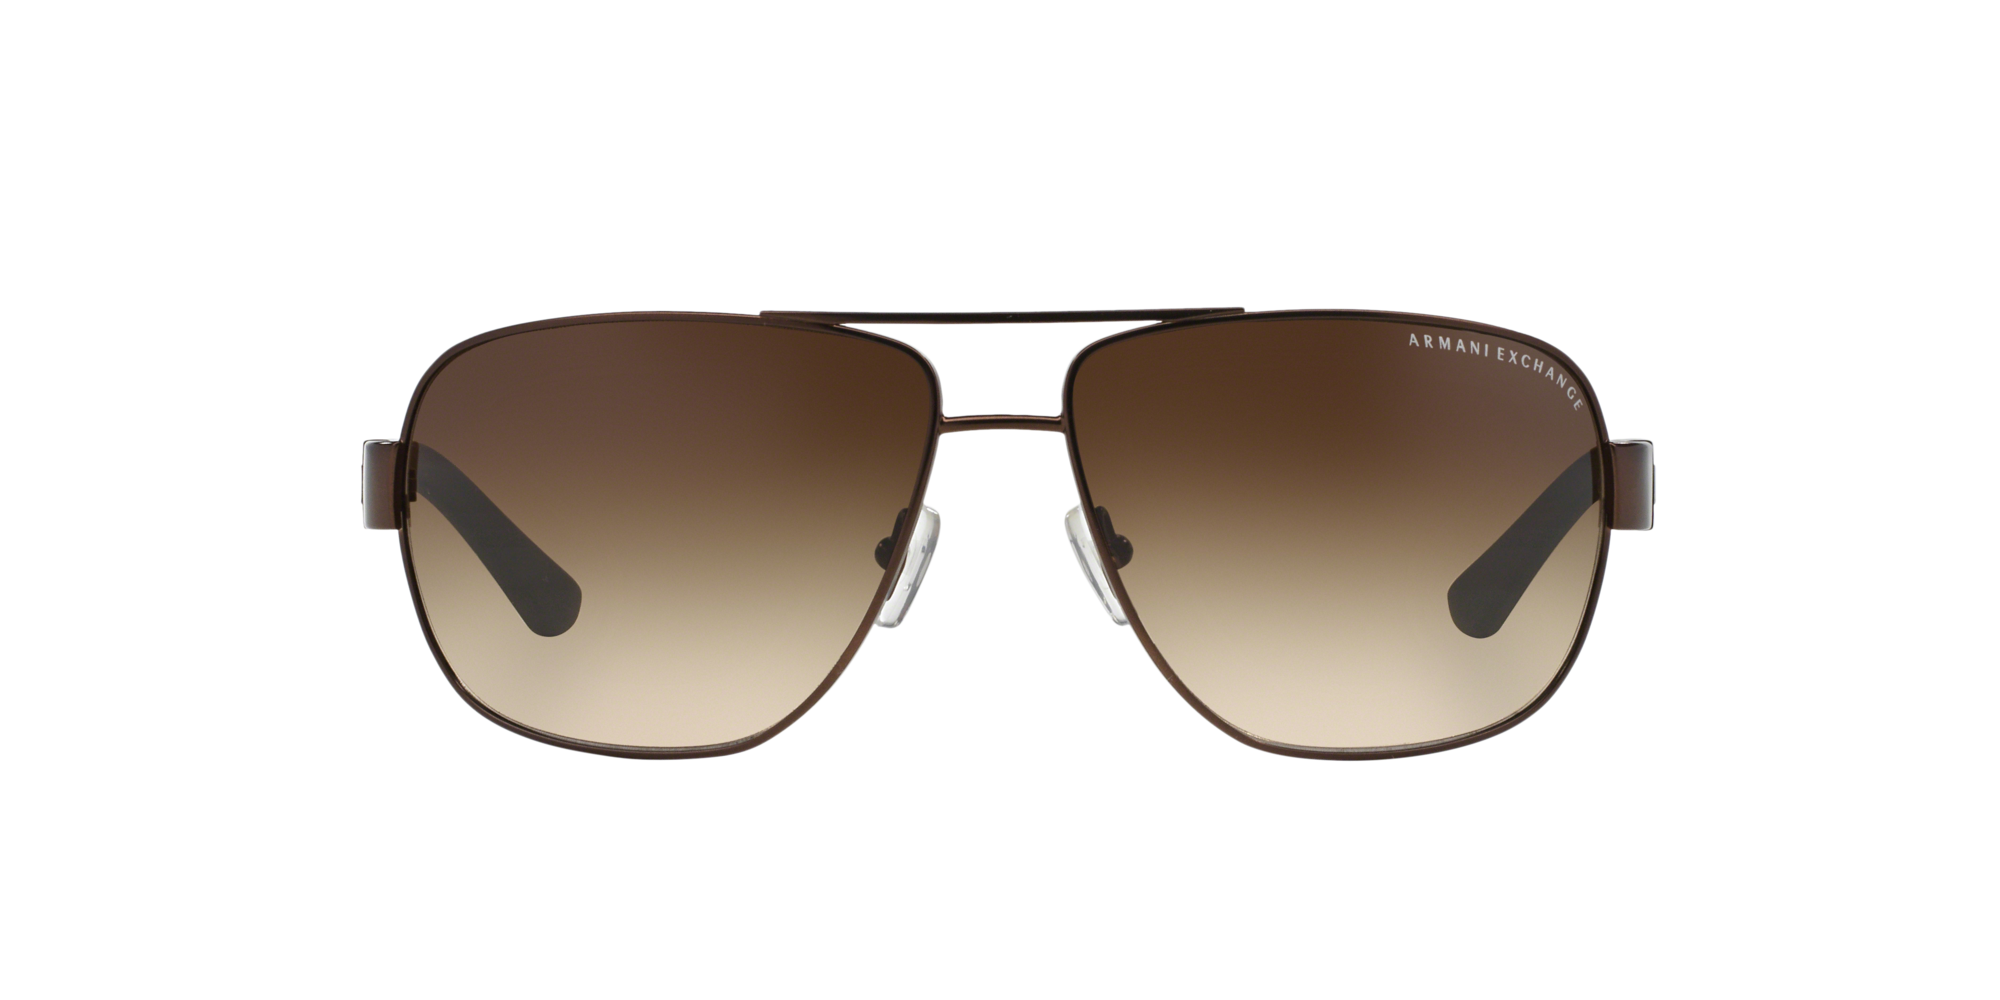 [products.image.front] Armani Exchange 2012S 0AX2012S 605813 Sonnenbrille